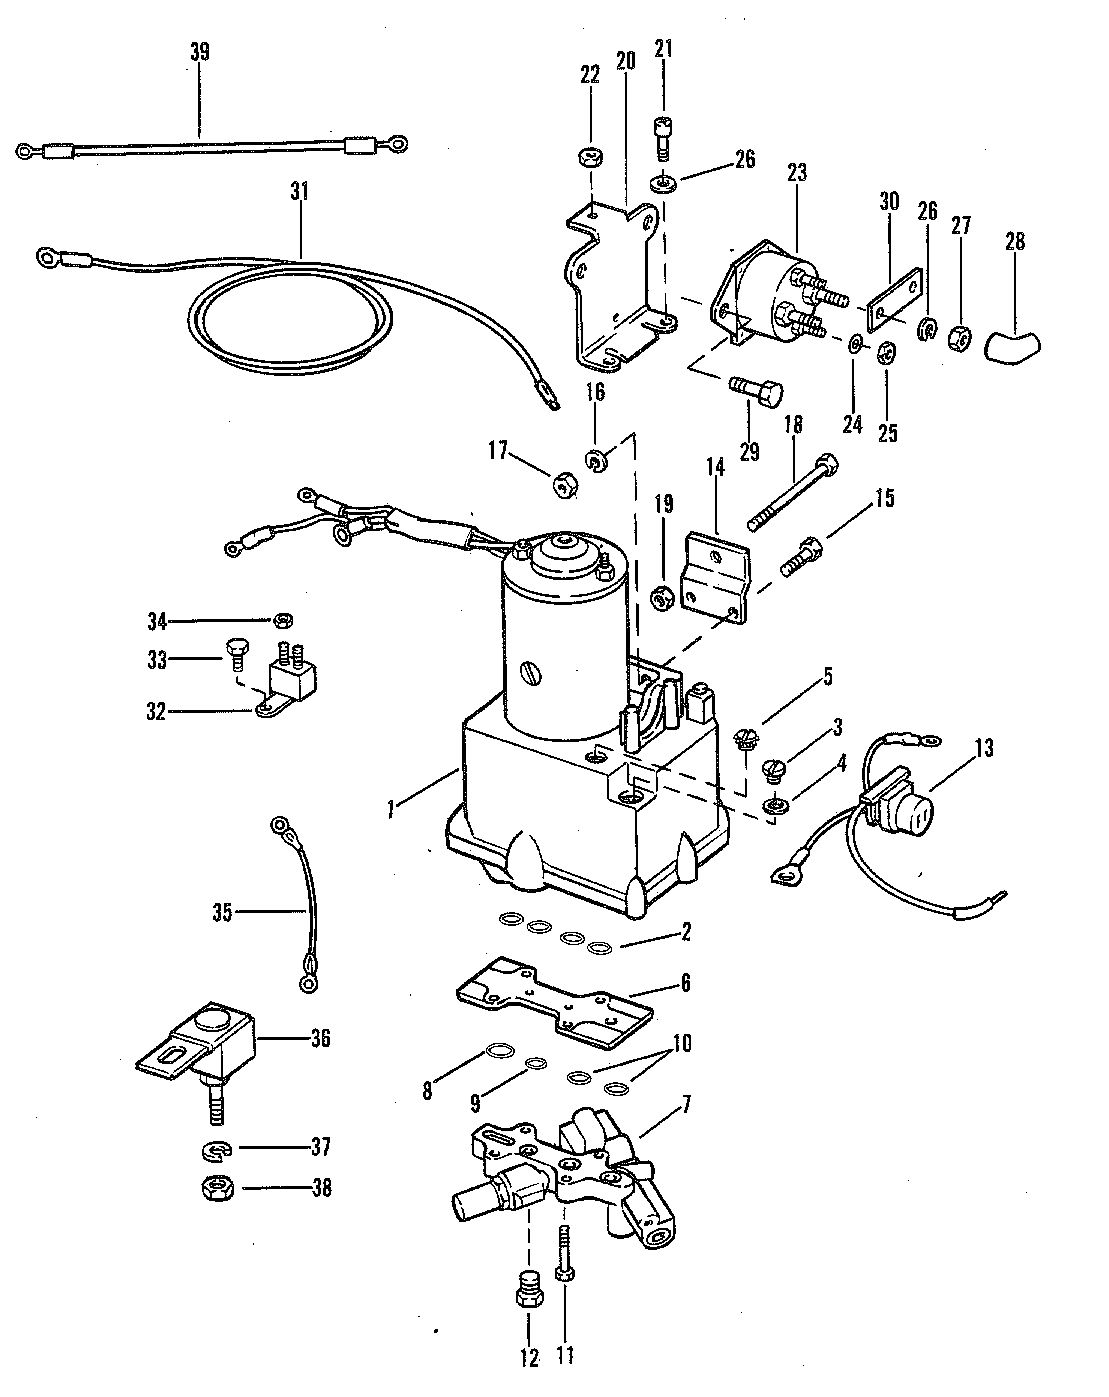 MARINER MARINER 80 POWER TRIM COMPONENTS (WITH CIRCUIT BREAKER AND FUSE)